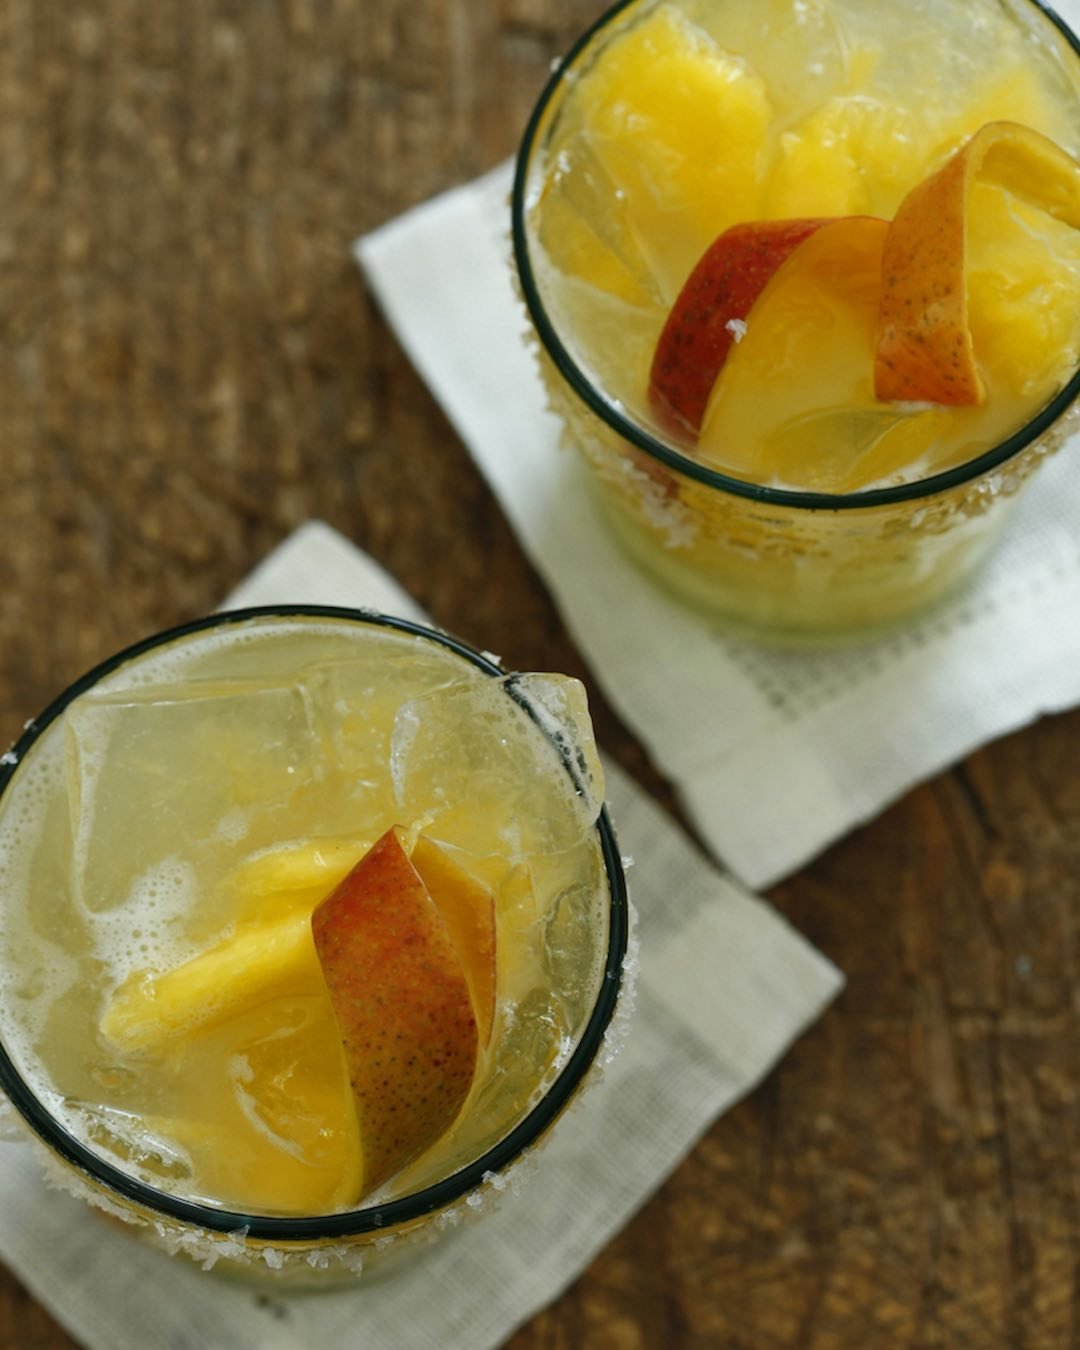 Kick off your Cinco de Mayo celebration with our recipe of the week: the &uacute;ltima Mango Margarita. Recipe by @ChefJoseGarces from his book &quot;The Latin Road Home.&rdquo; Follow profile link for recipe.&iexcl;Salud!
 
#cincodemayo, #cincodemay